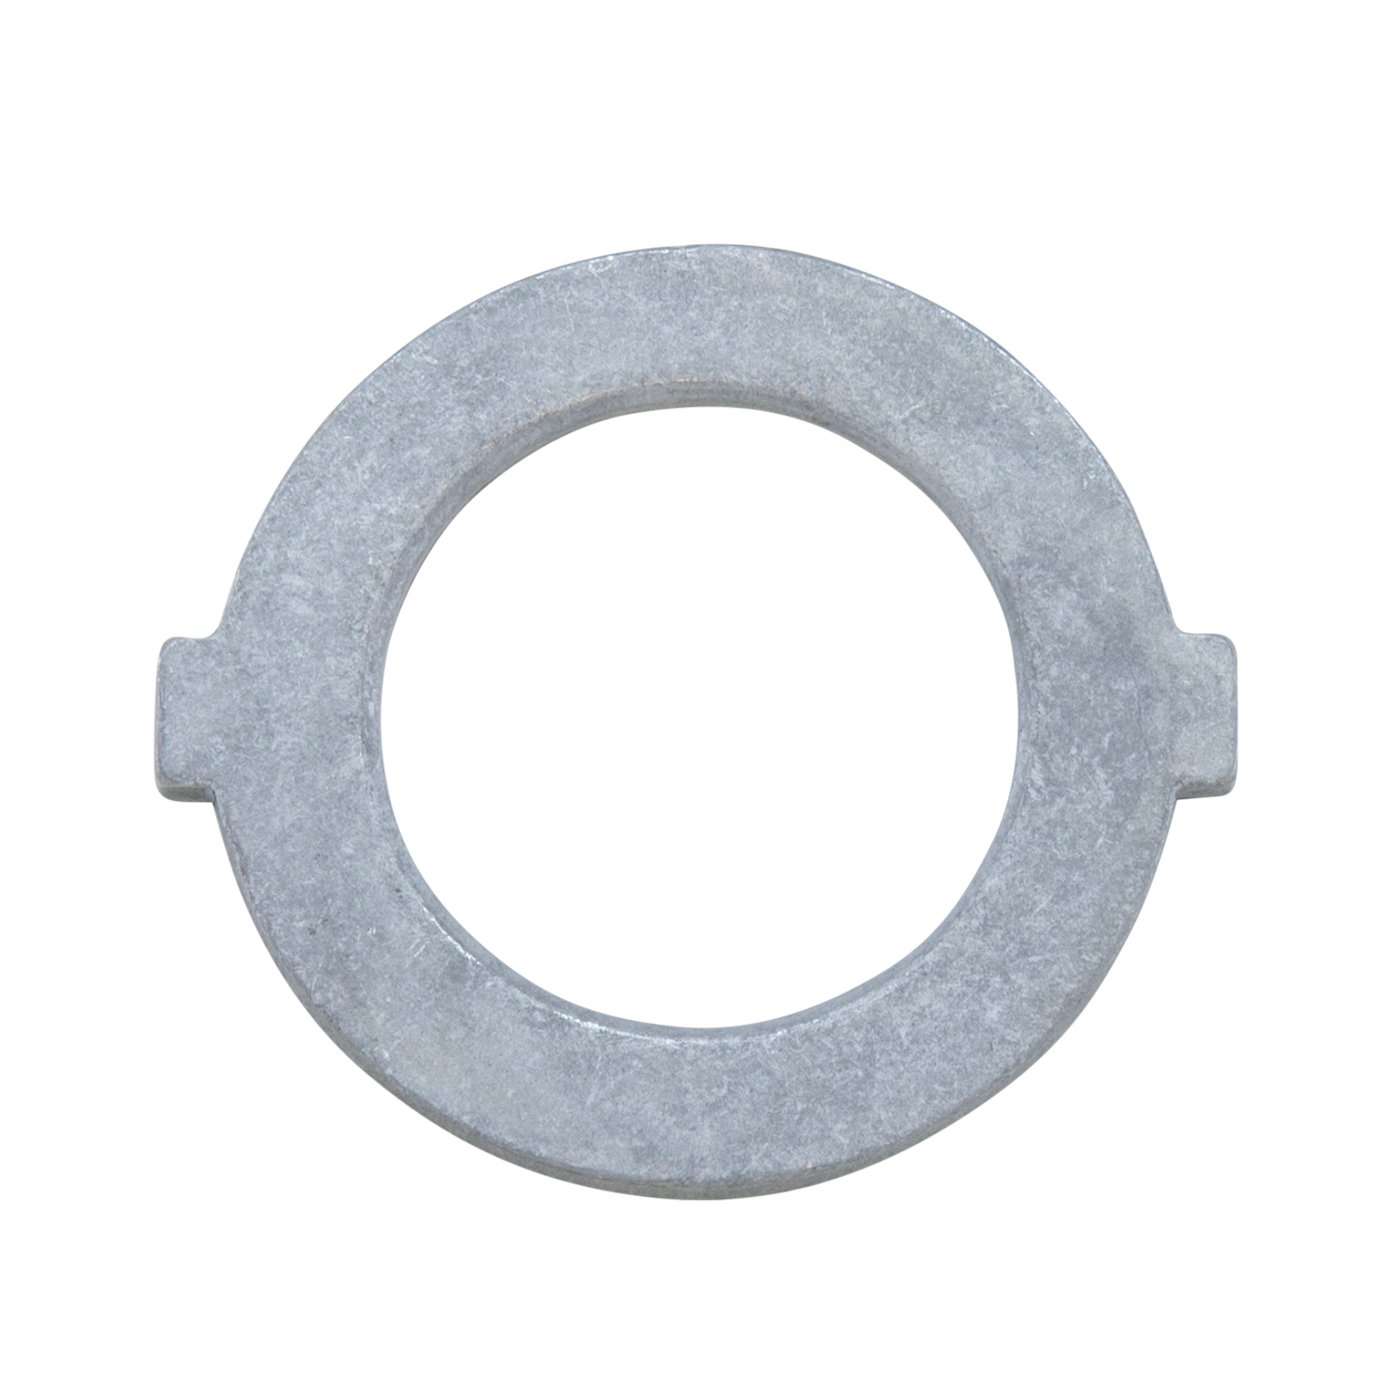 Thrust Washer For GM 9.25 in. Ifs Stub Shaft.